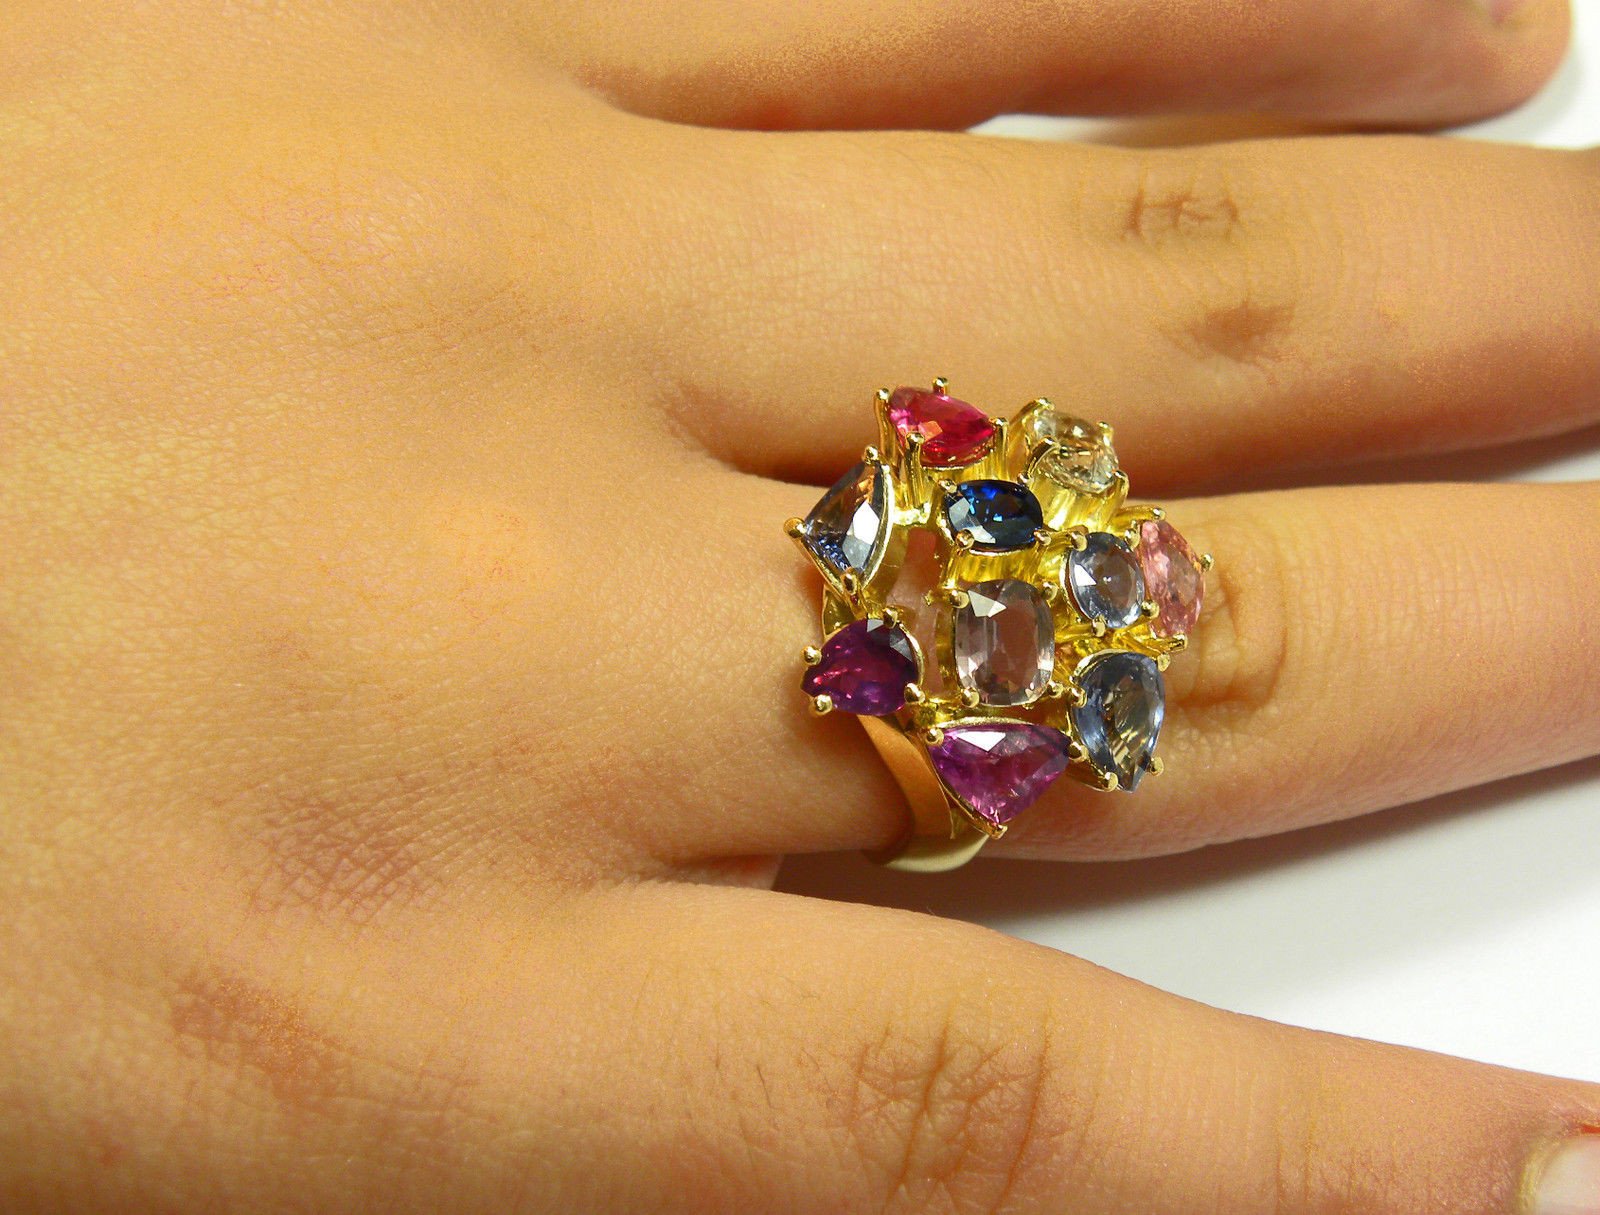 5.67 Carat Untreated Multicolor Sapphire Ring in 18k Yellow Gold